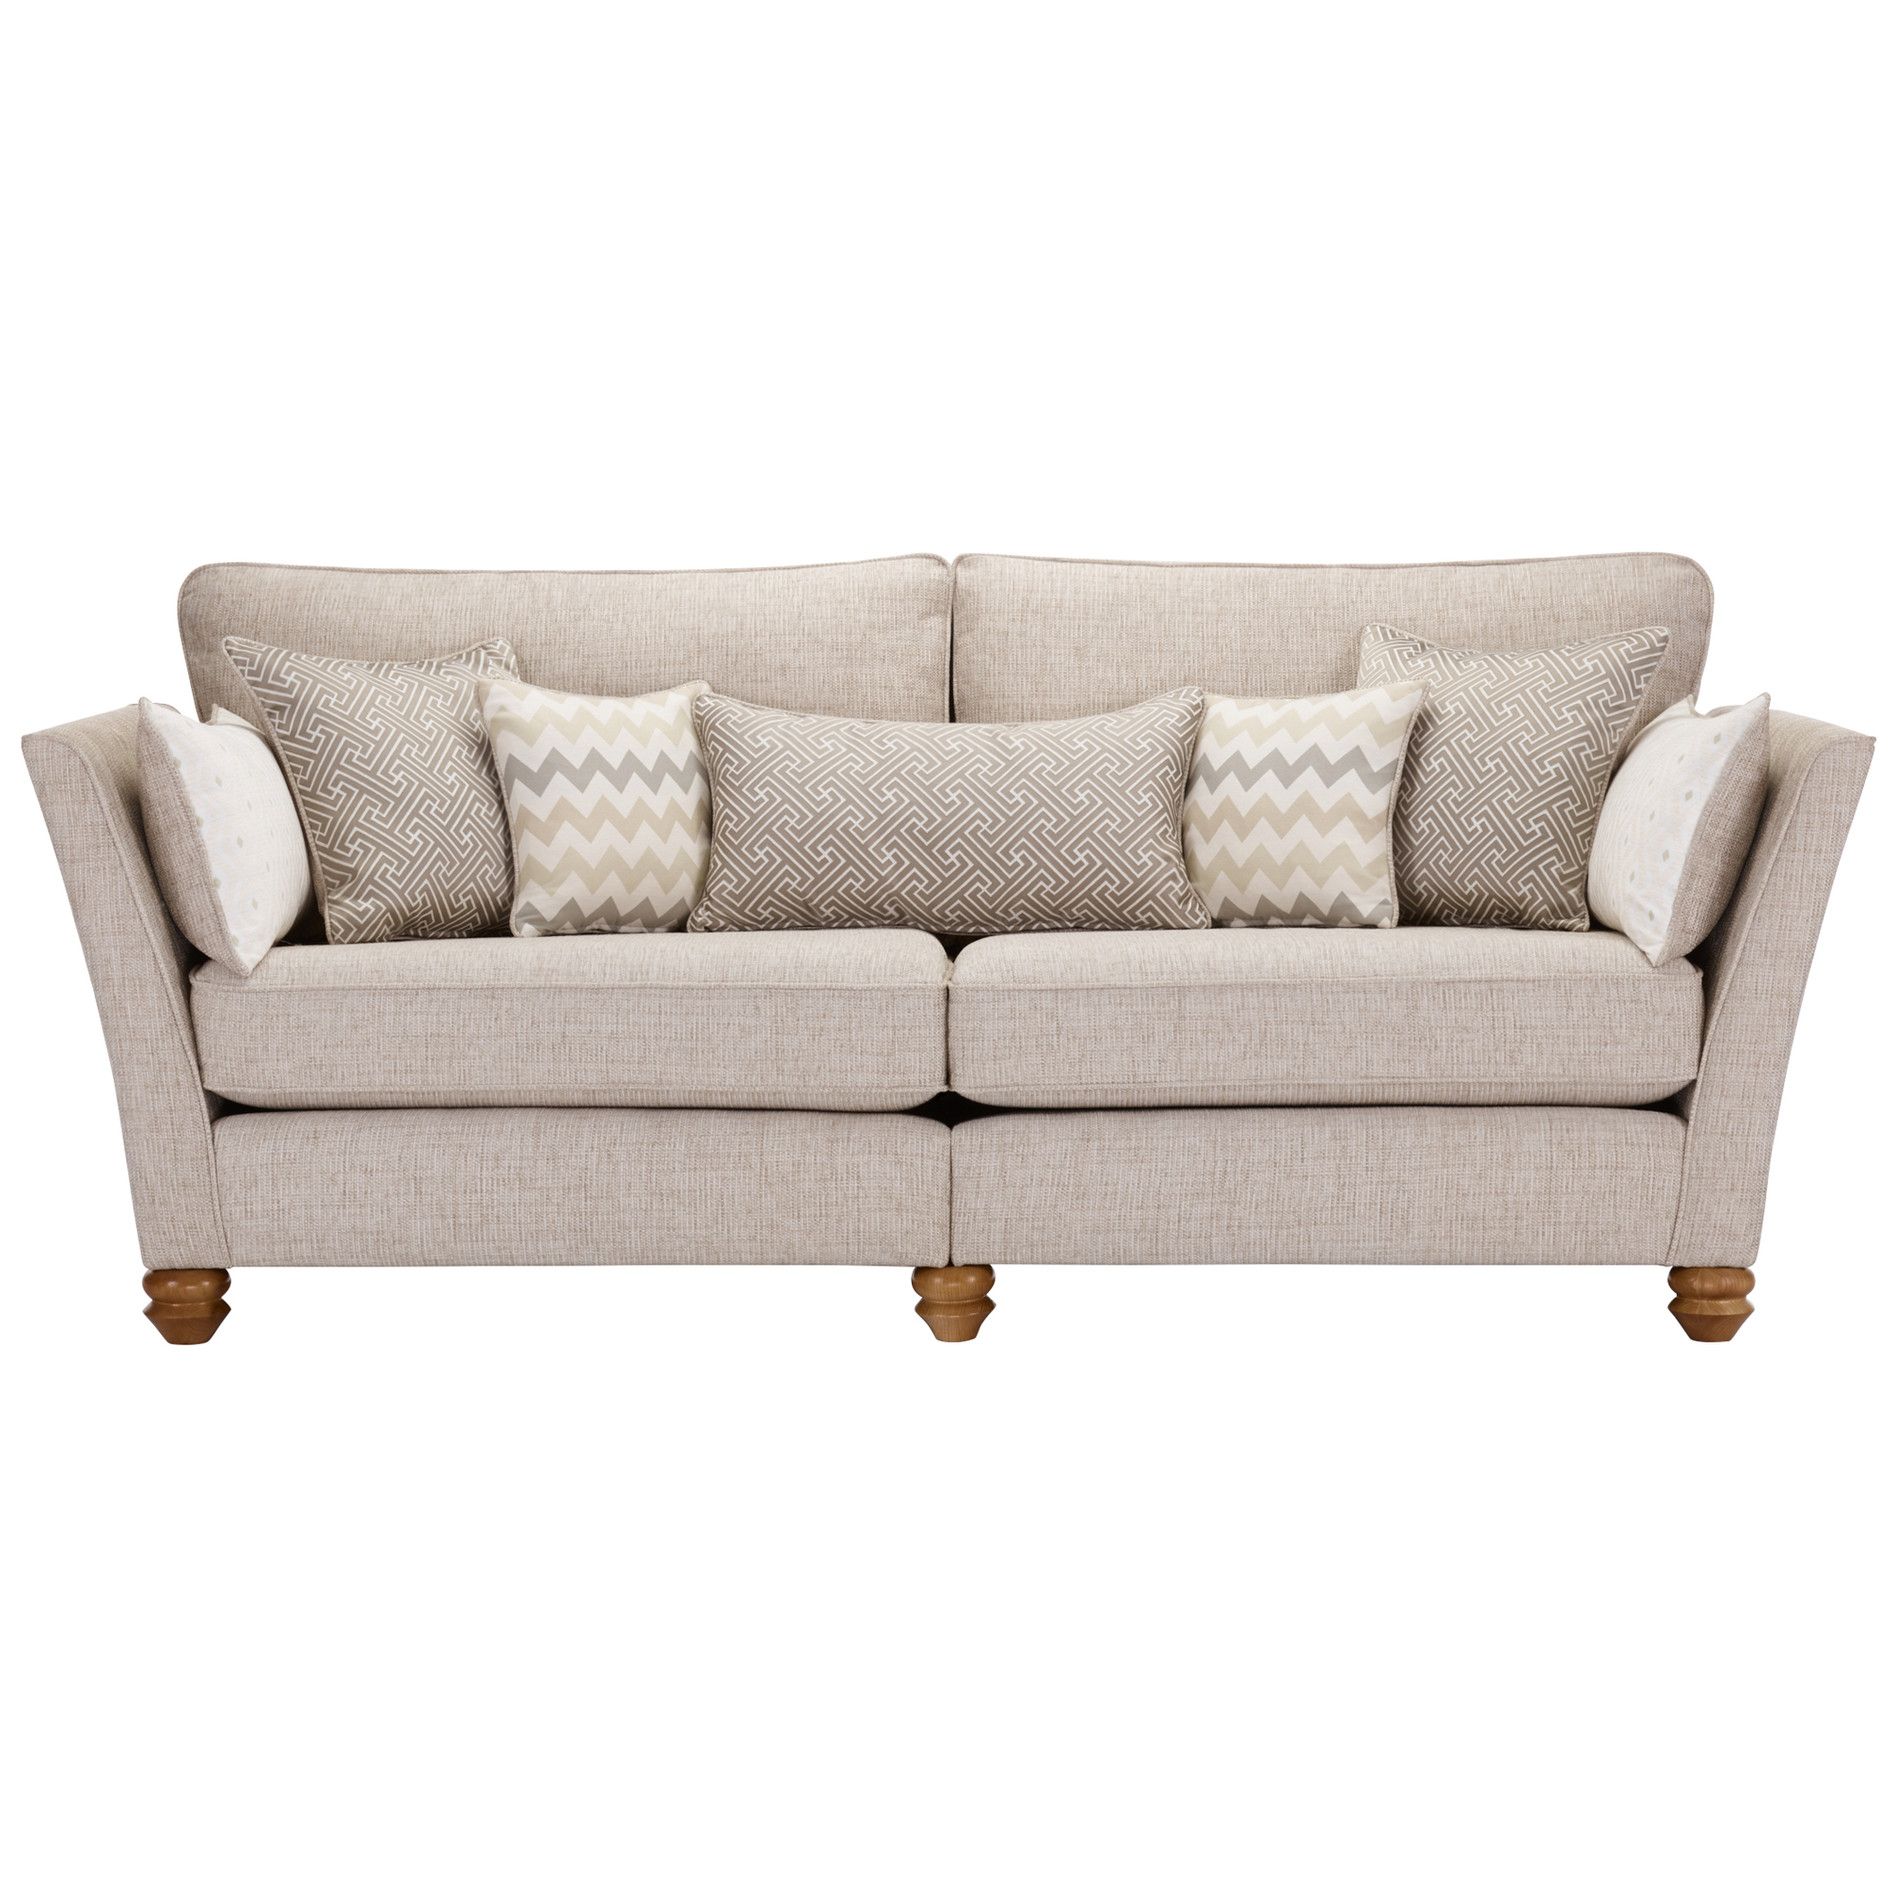 Gainsborough 4 Seater Sofa In Beige + Matching Scatters Regarding Sofas In Beige (Gallery 14 of 20)